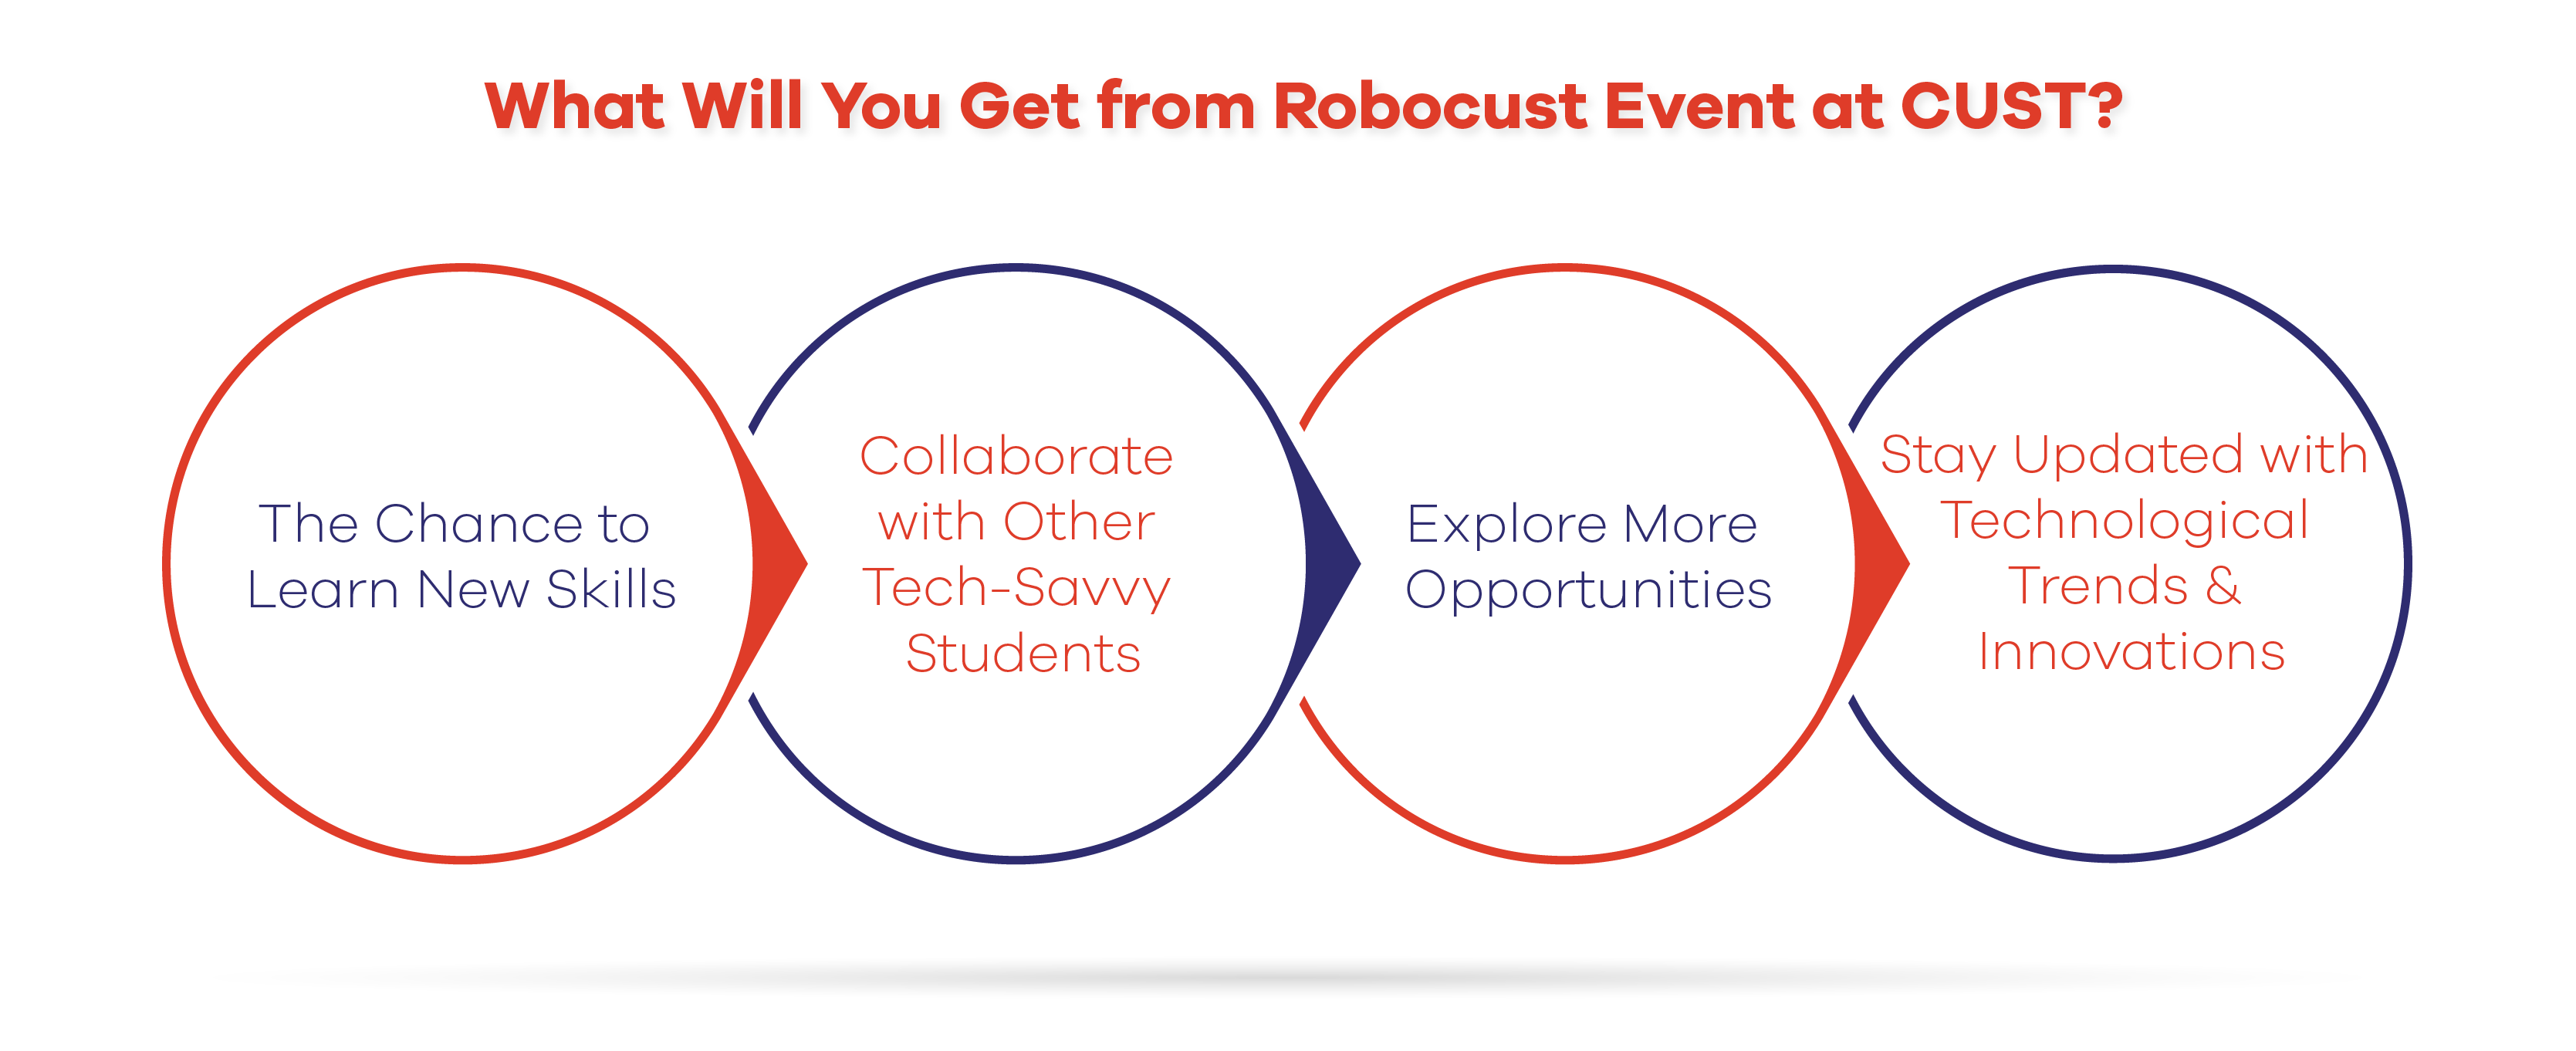 What Will You Get from Robocust Event at CUST? 